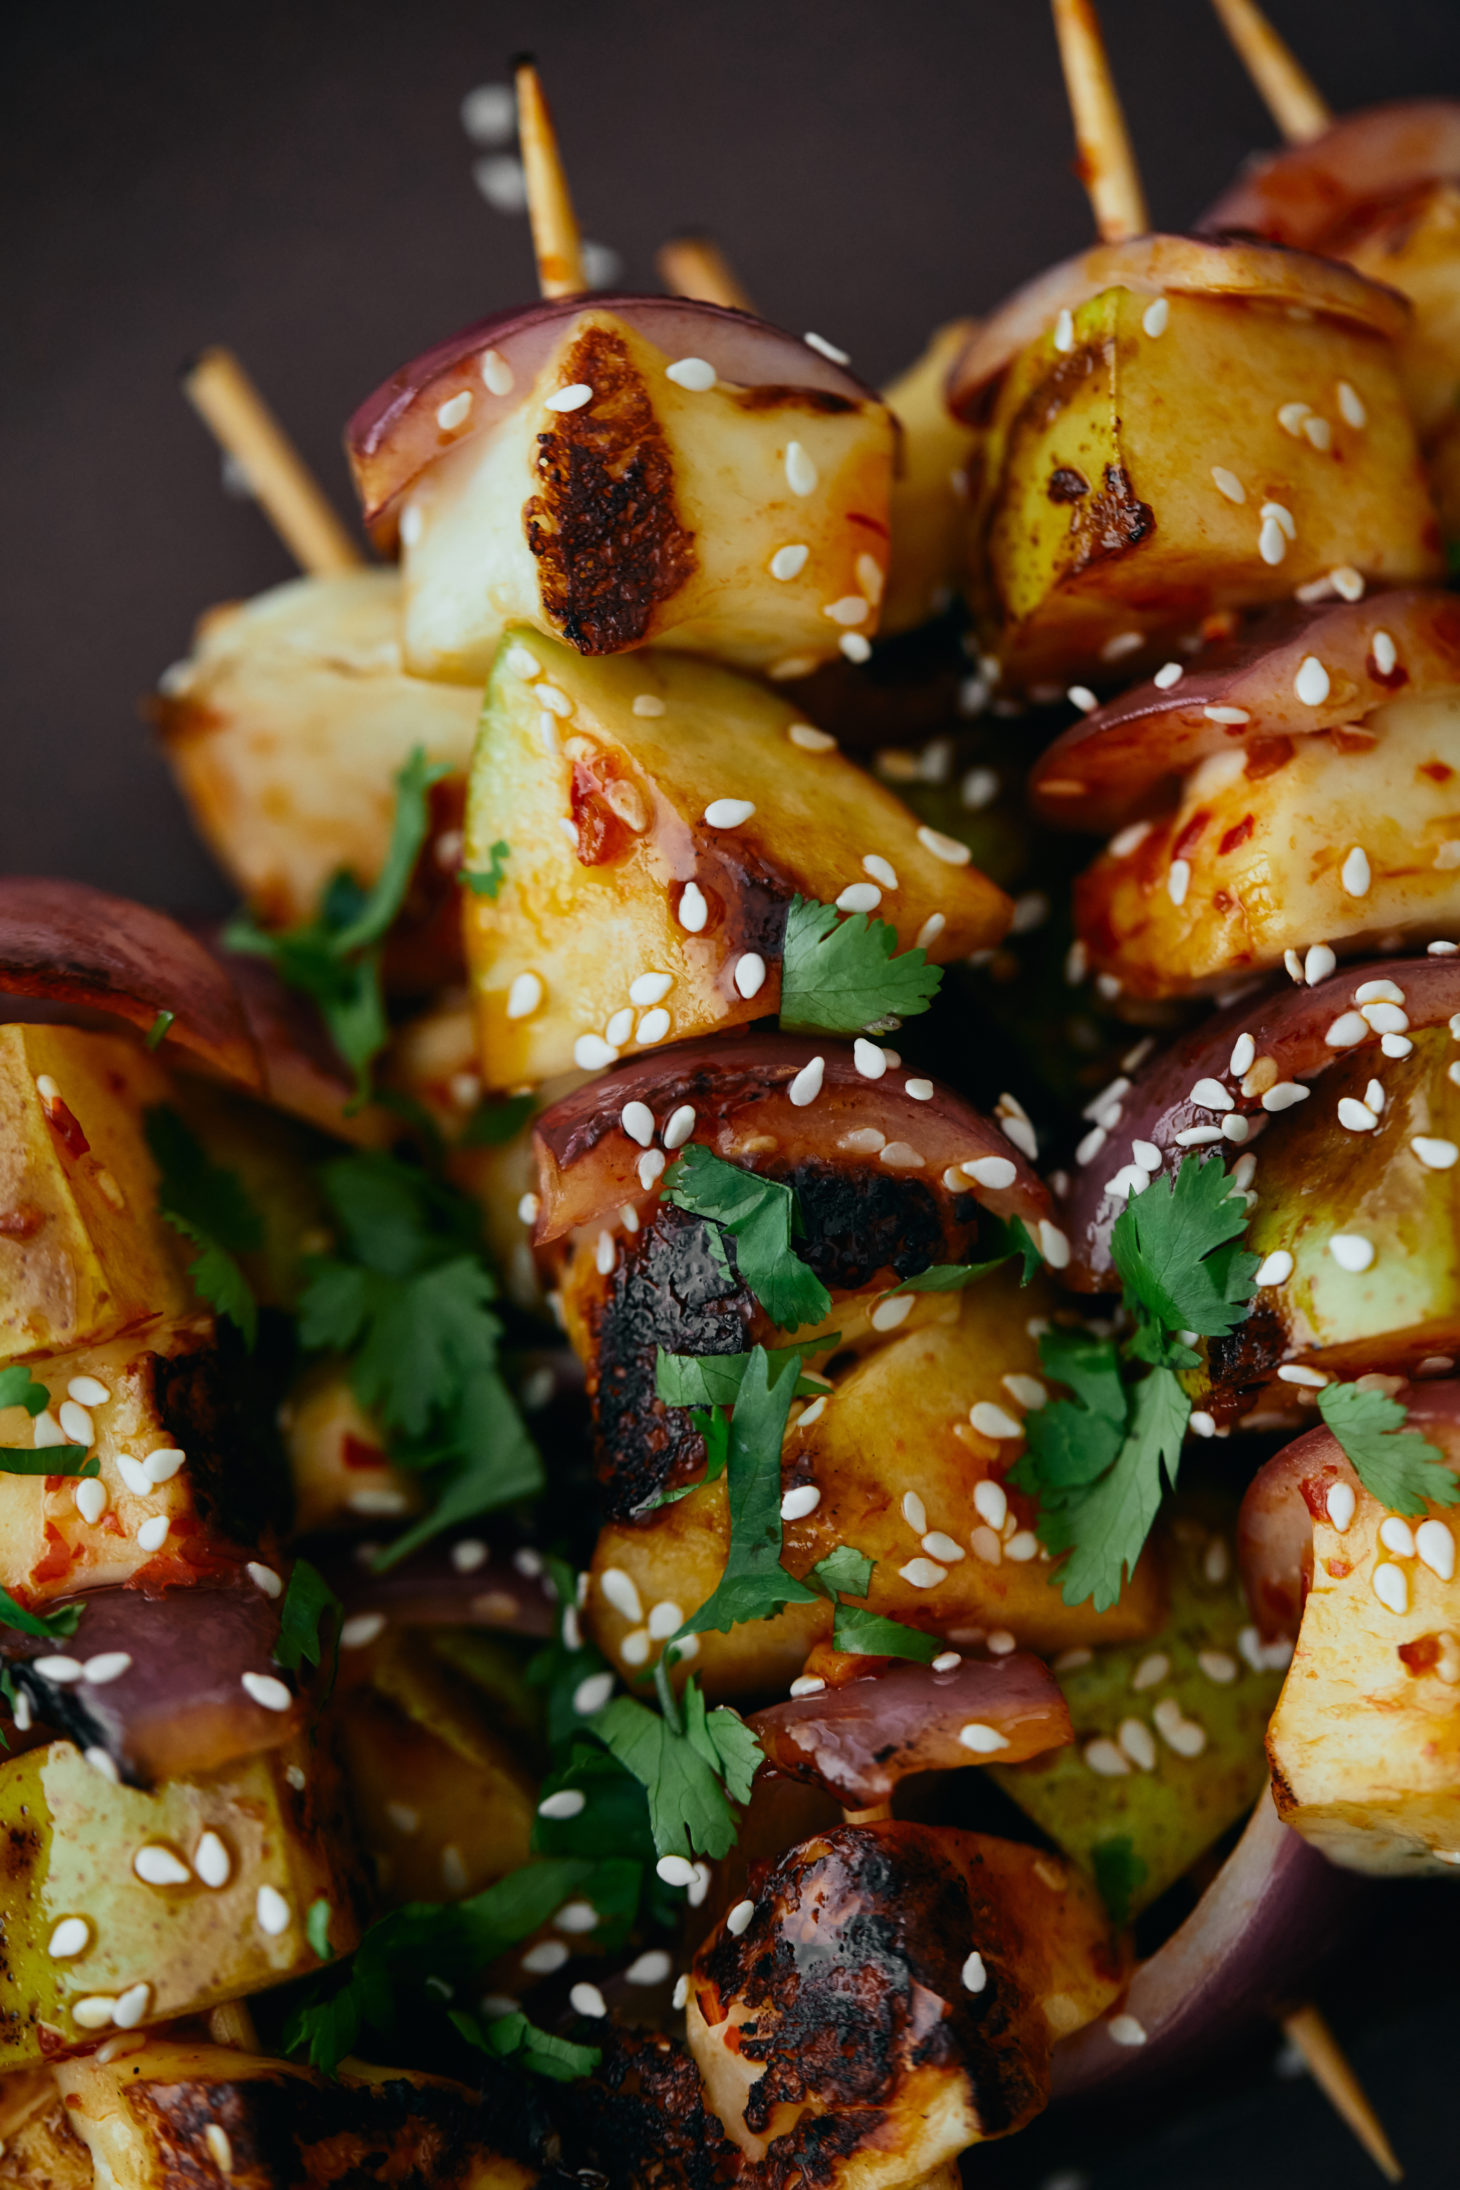 Grilled Pear and Halloumi Skewers with Chili Sauce